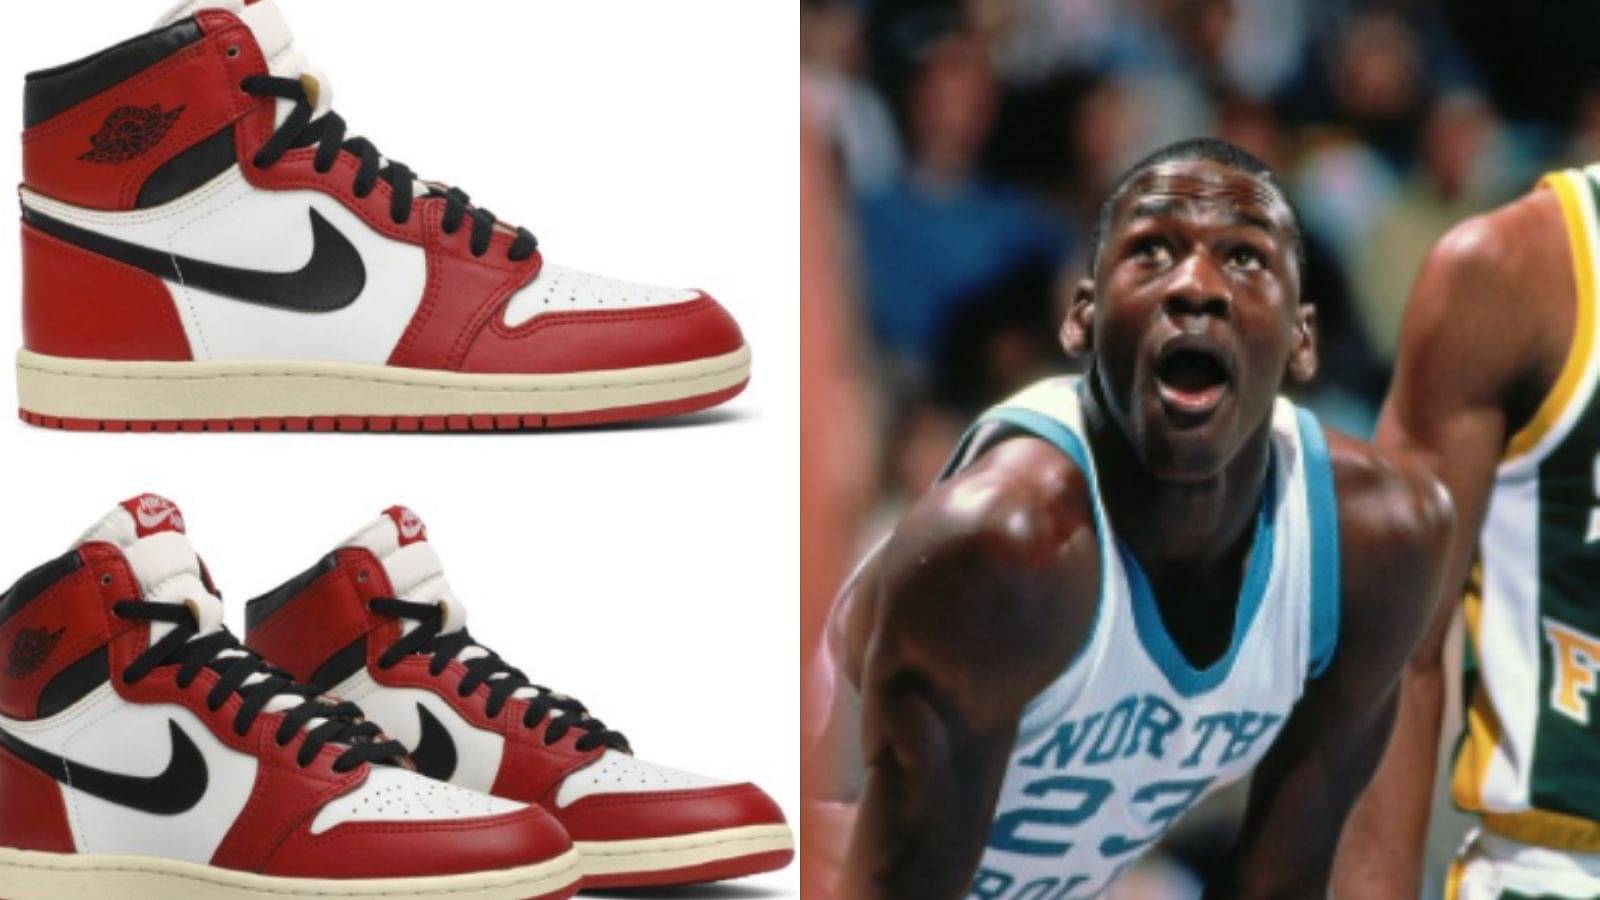 the snow's Repellent Superiority The Air Jordan 1 almost did not happen thanks to Michael Jordan's wish to  sign with Adidas": His Airness' Mother is the reason why Jordan Brand  exists - The SportsRush